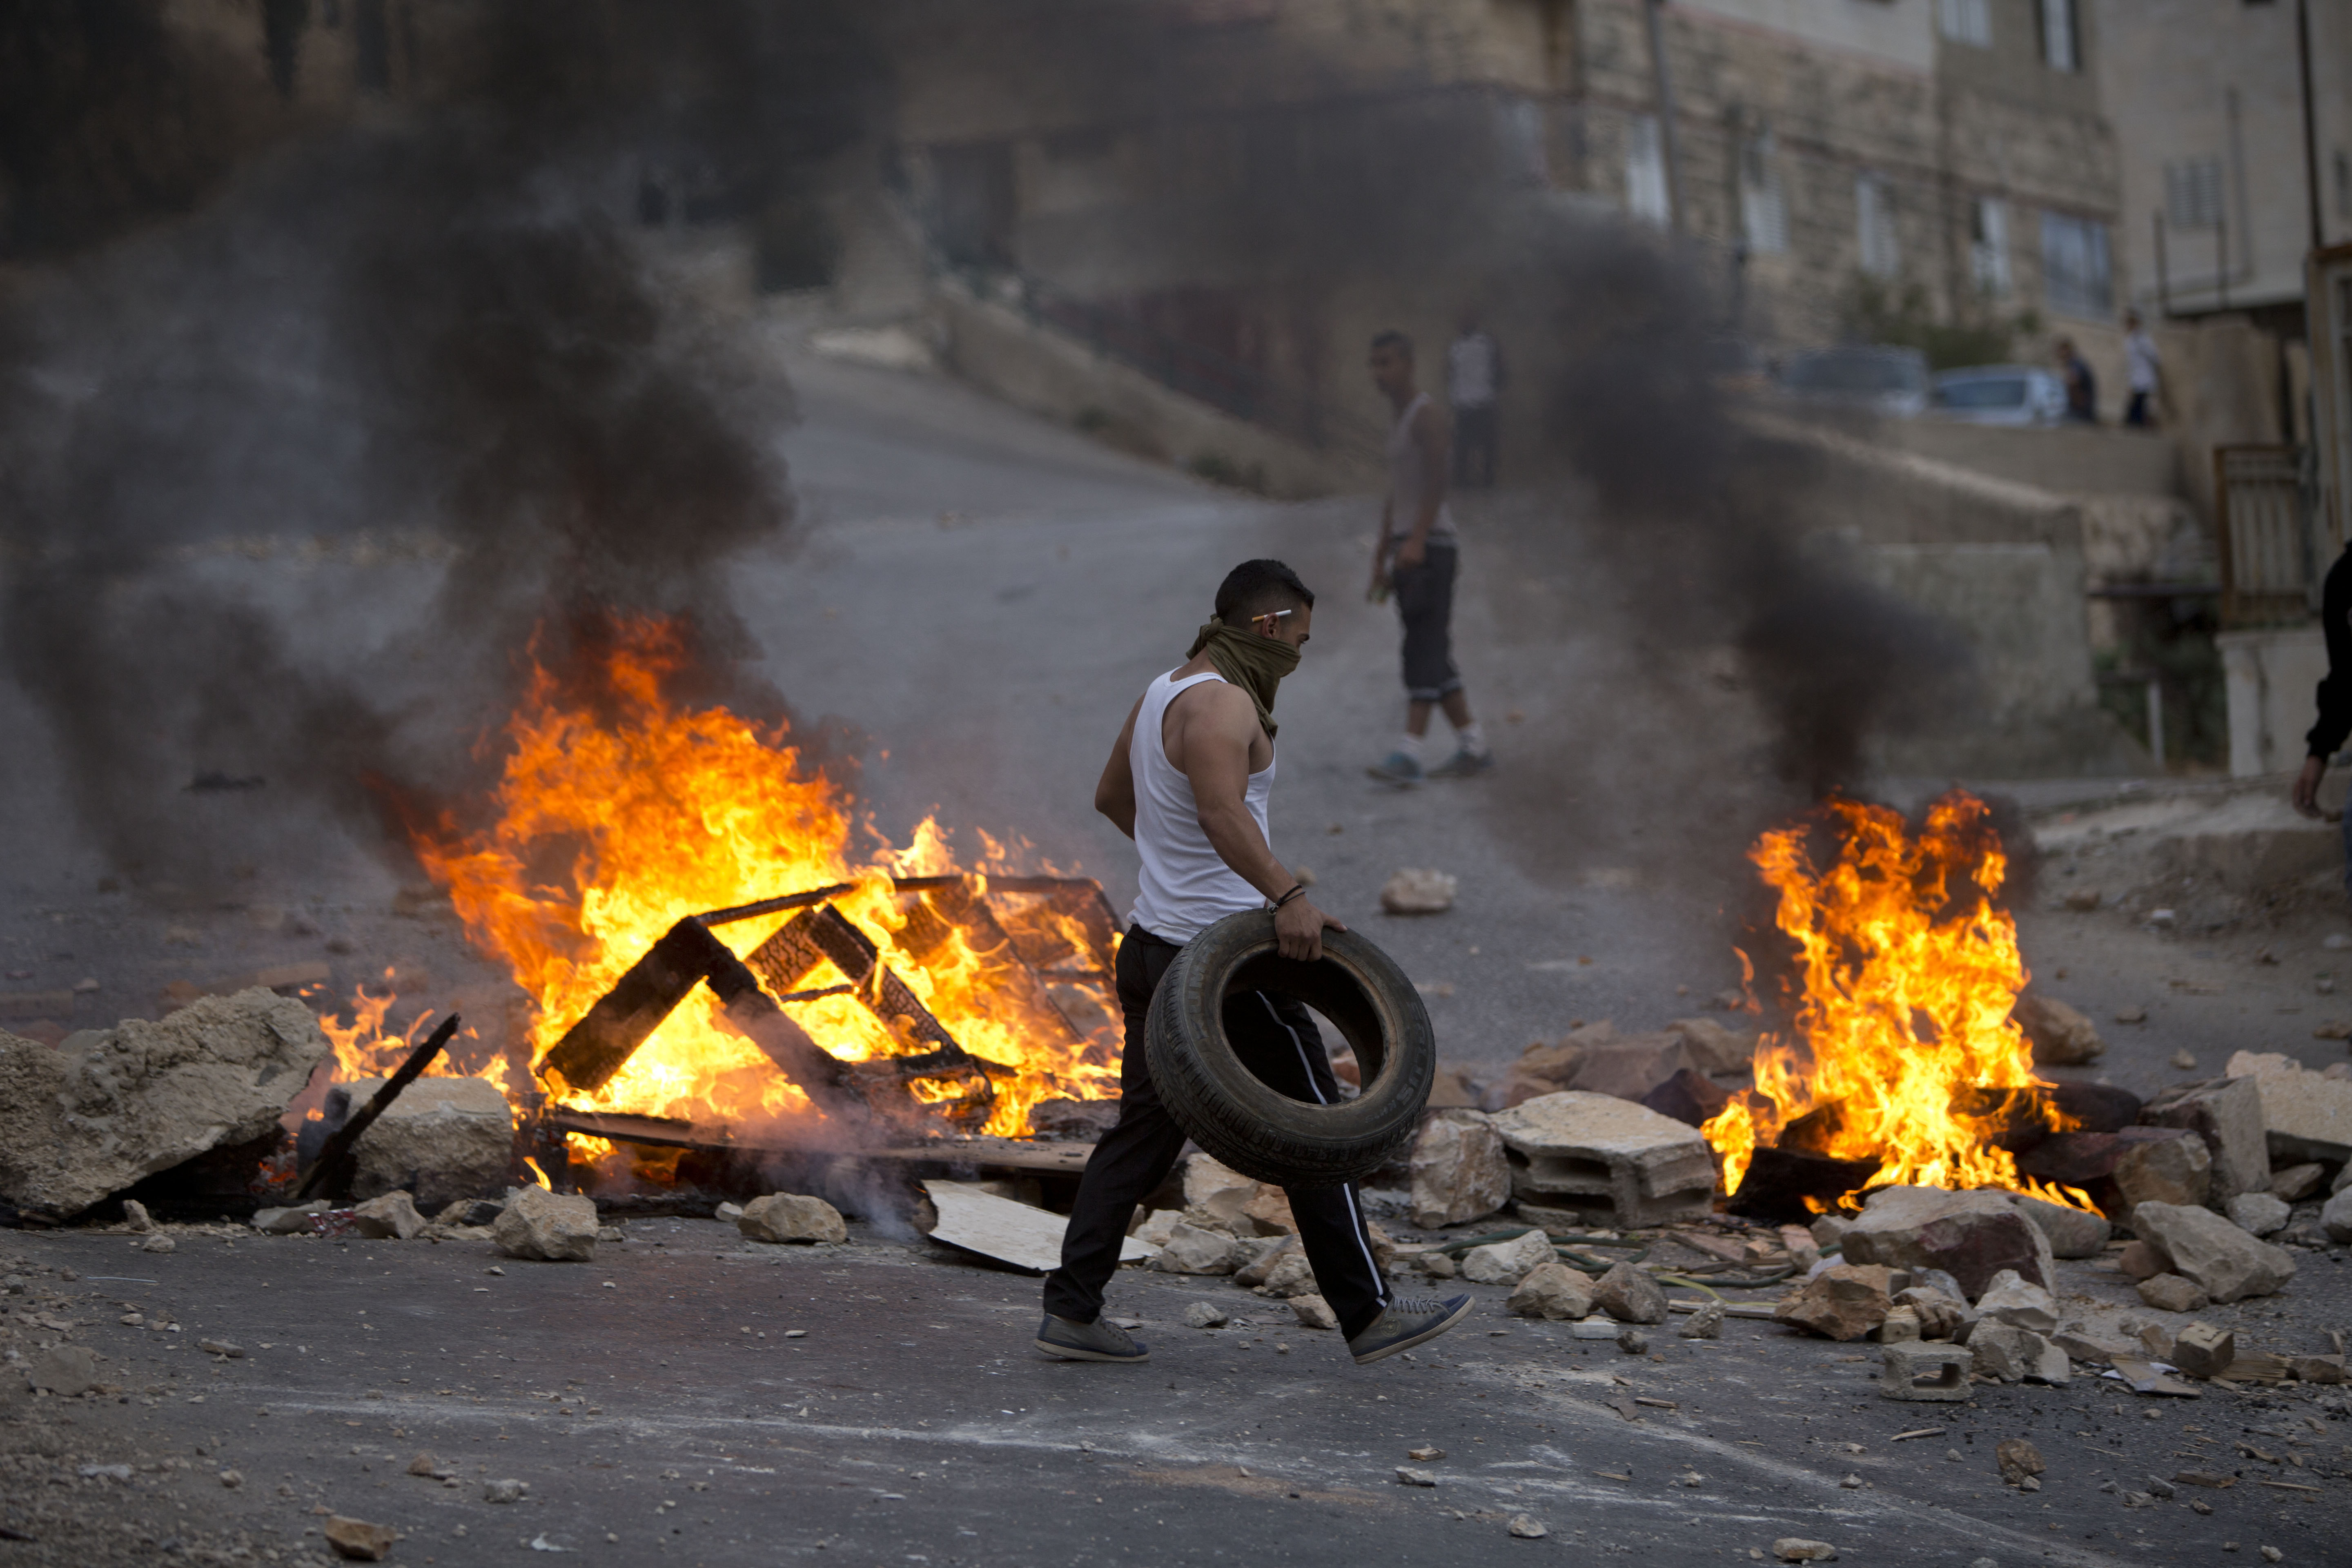 Palestinians burn tires during Israeli military raid in the West Bank city of Nablus on Tuesday. Photo: AP